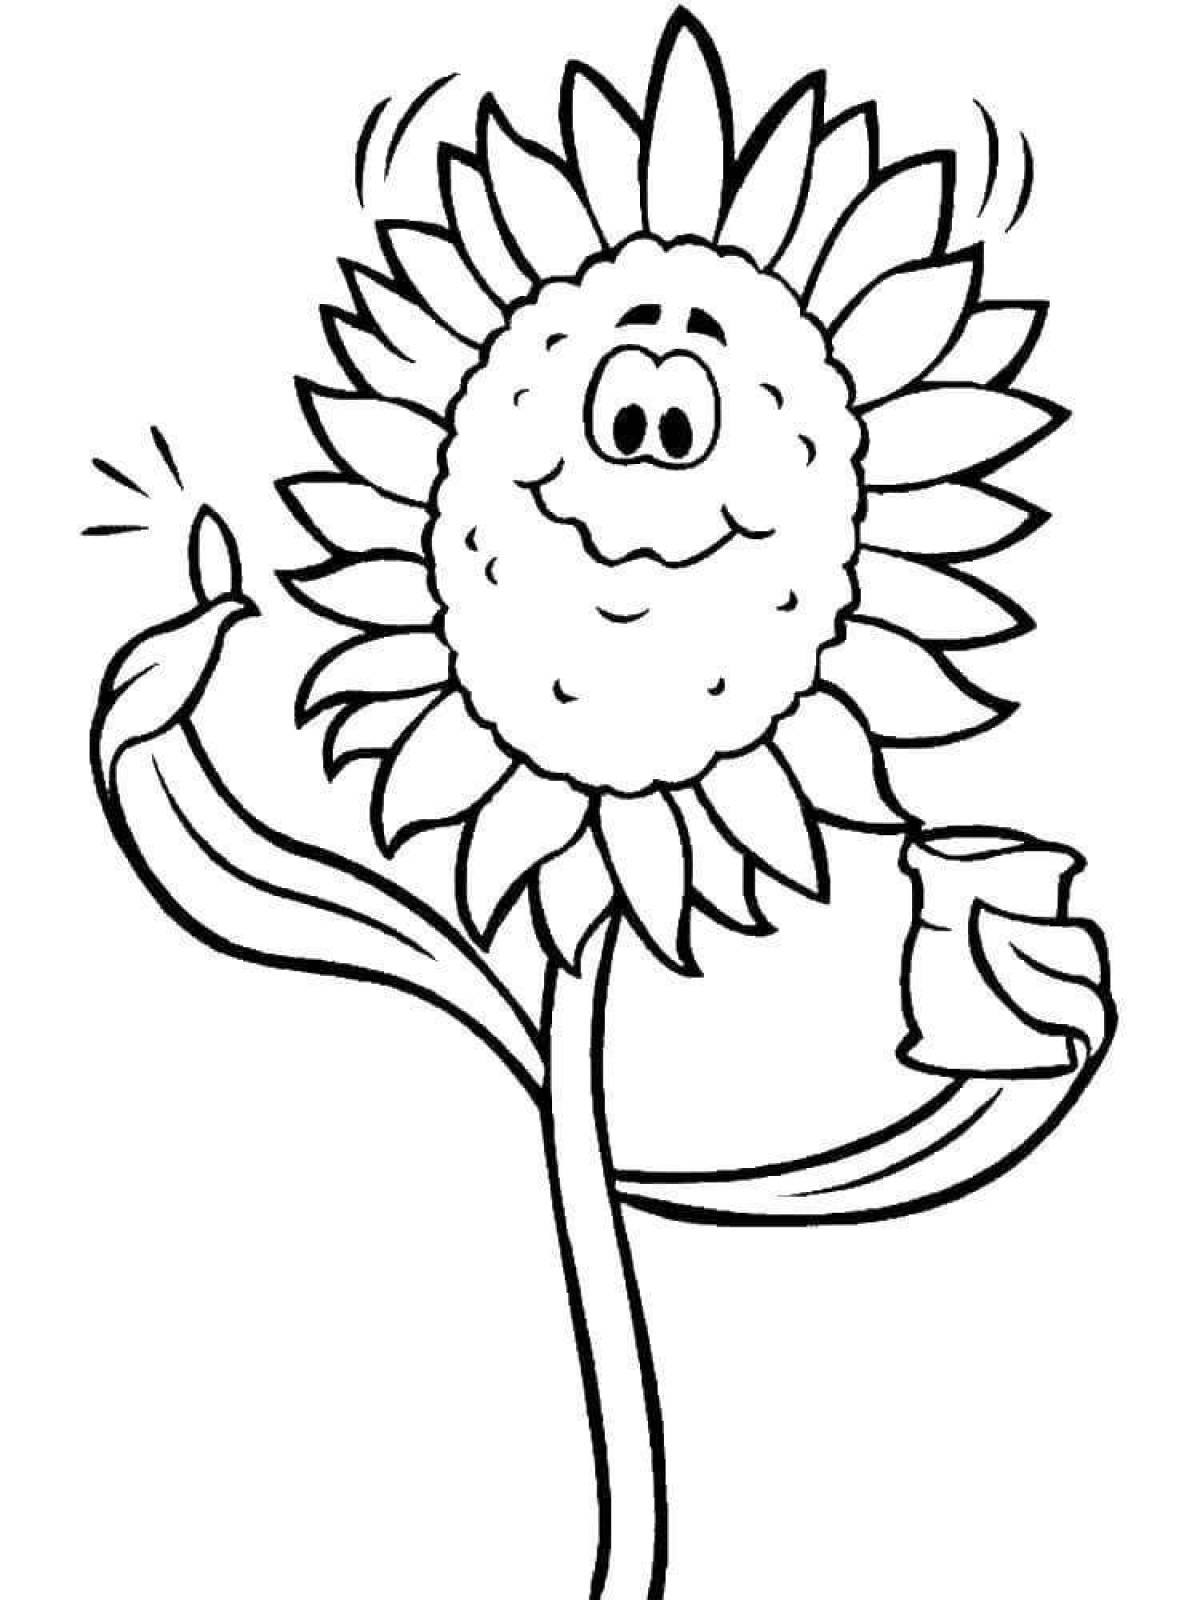 Outstanding sunflower coloring book for kids